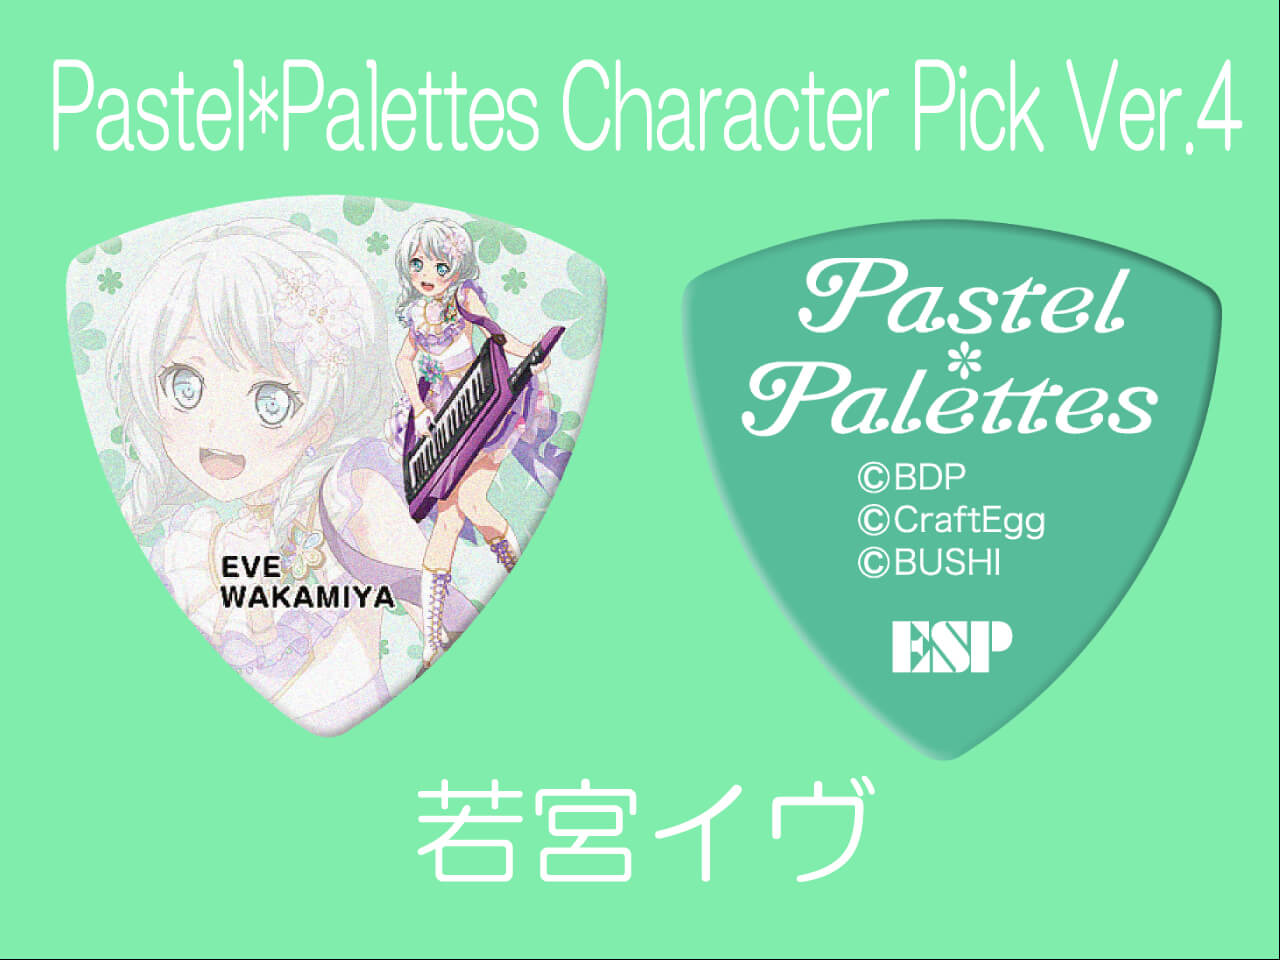 【ESP×BanG Dream!コラボピック】Pastel*Palettes Character Pick Ver.4 "若宮イヴ"（GBP EVE PASTEL PALETTES 4）＆”ハメパチ” セット